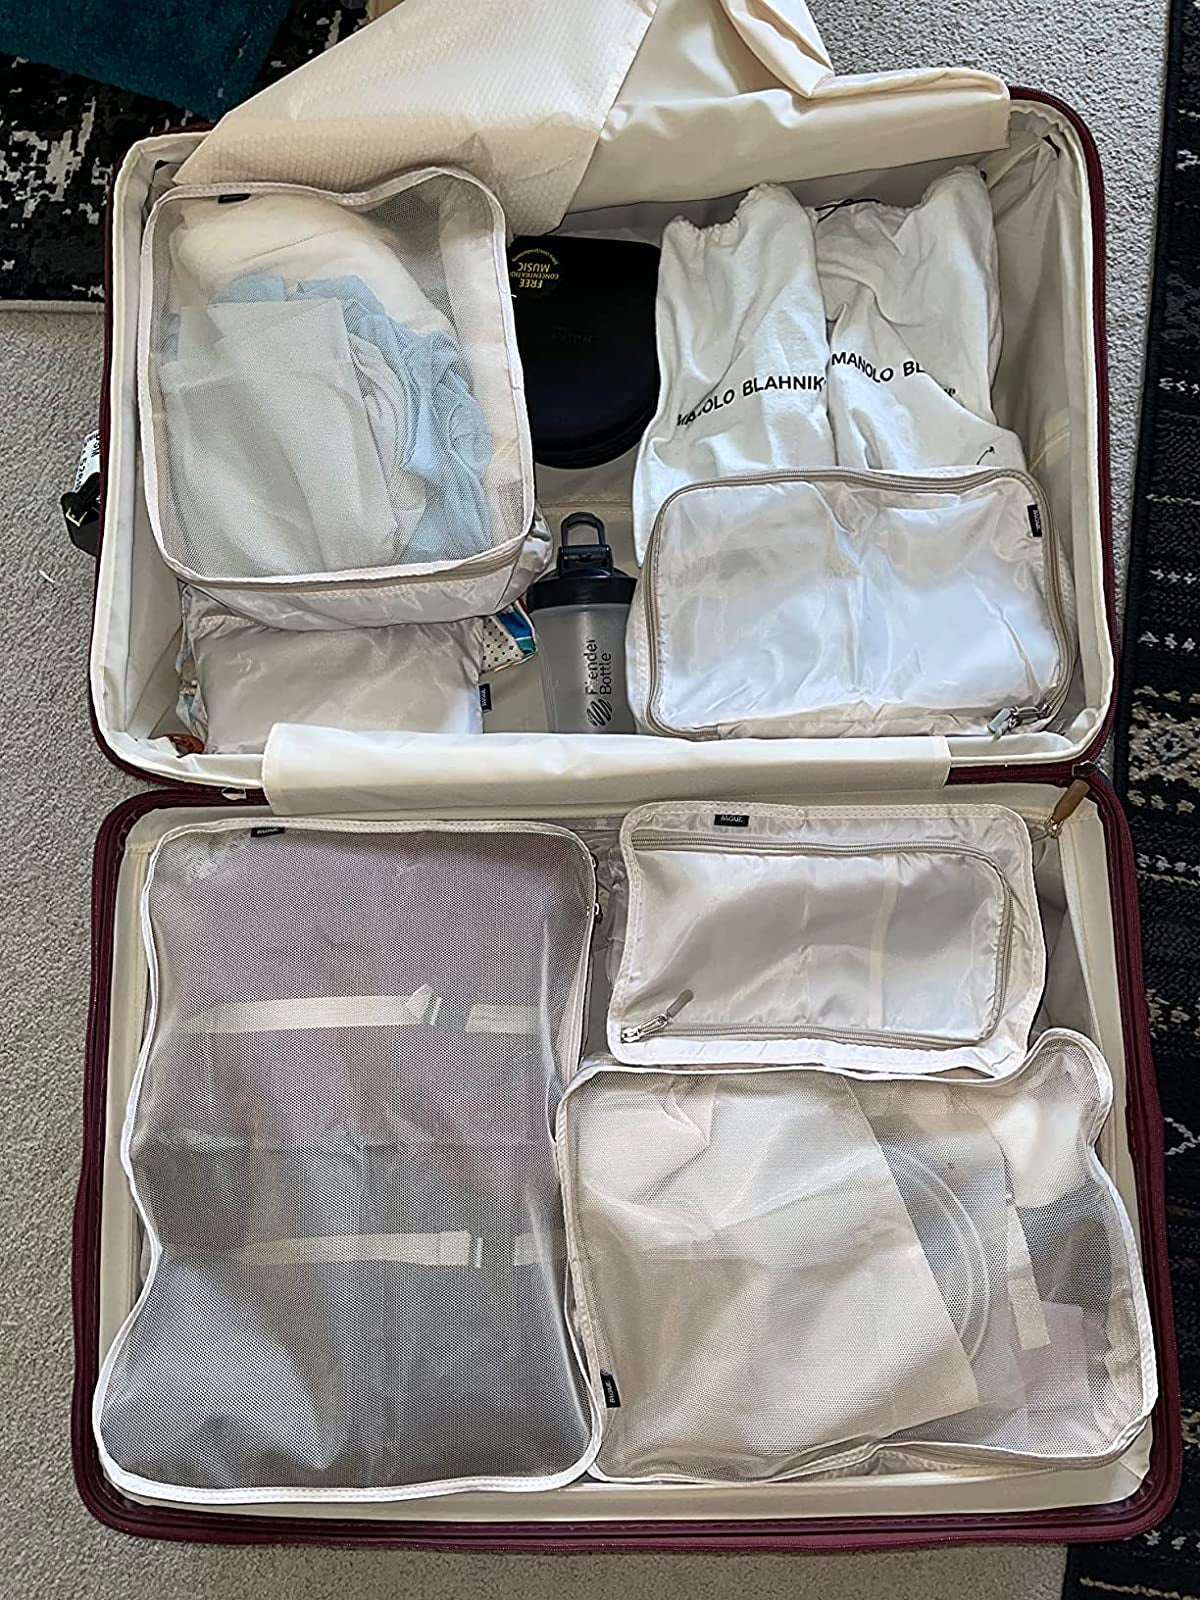 the set of packing cubes in a suitcase